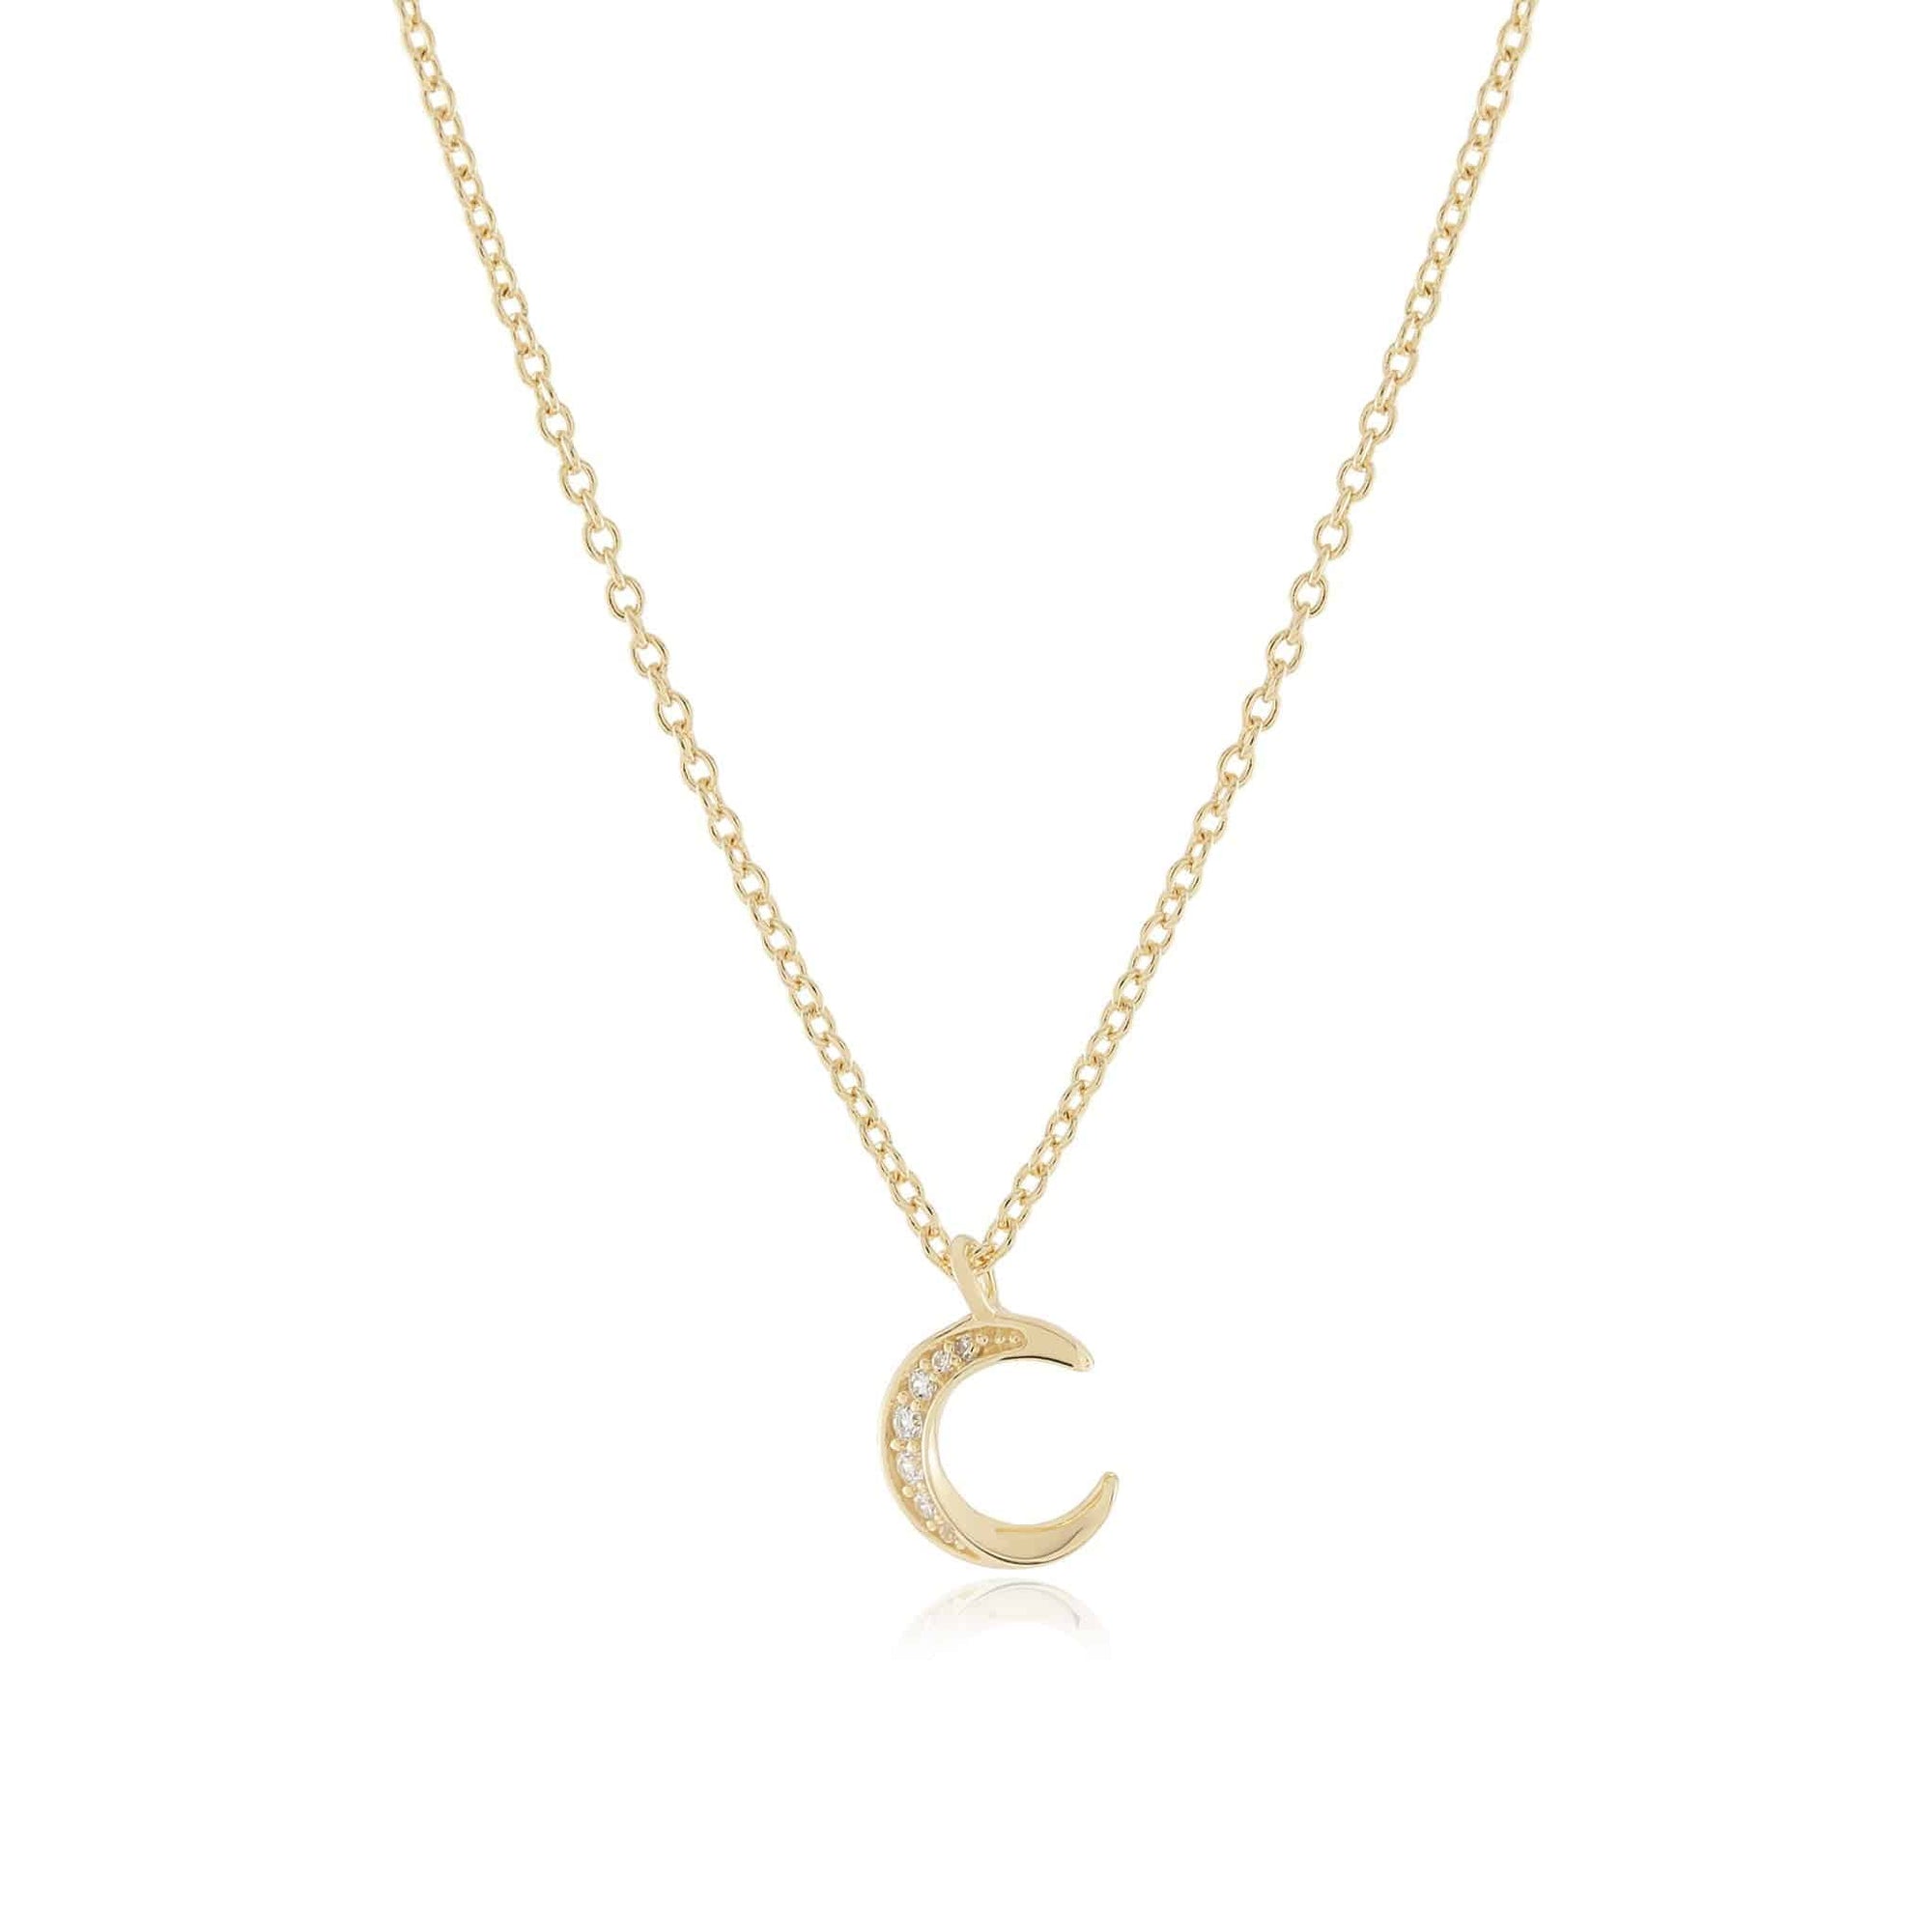 TWISTED CRESCENT MOON NECKLACE - Trove & Co.